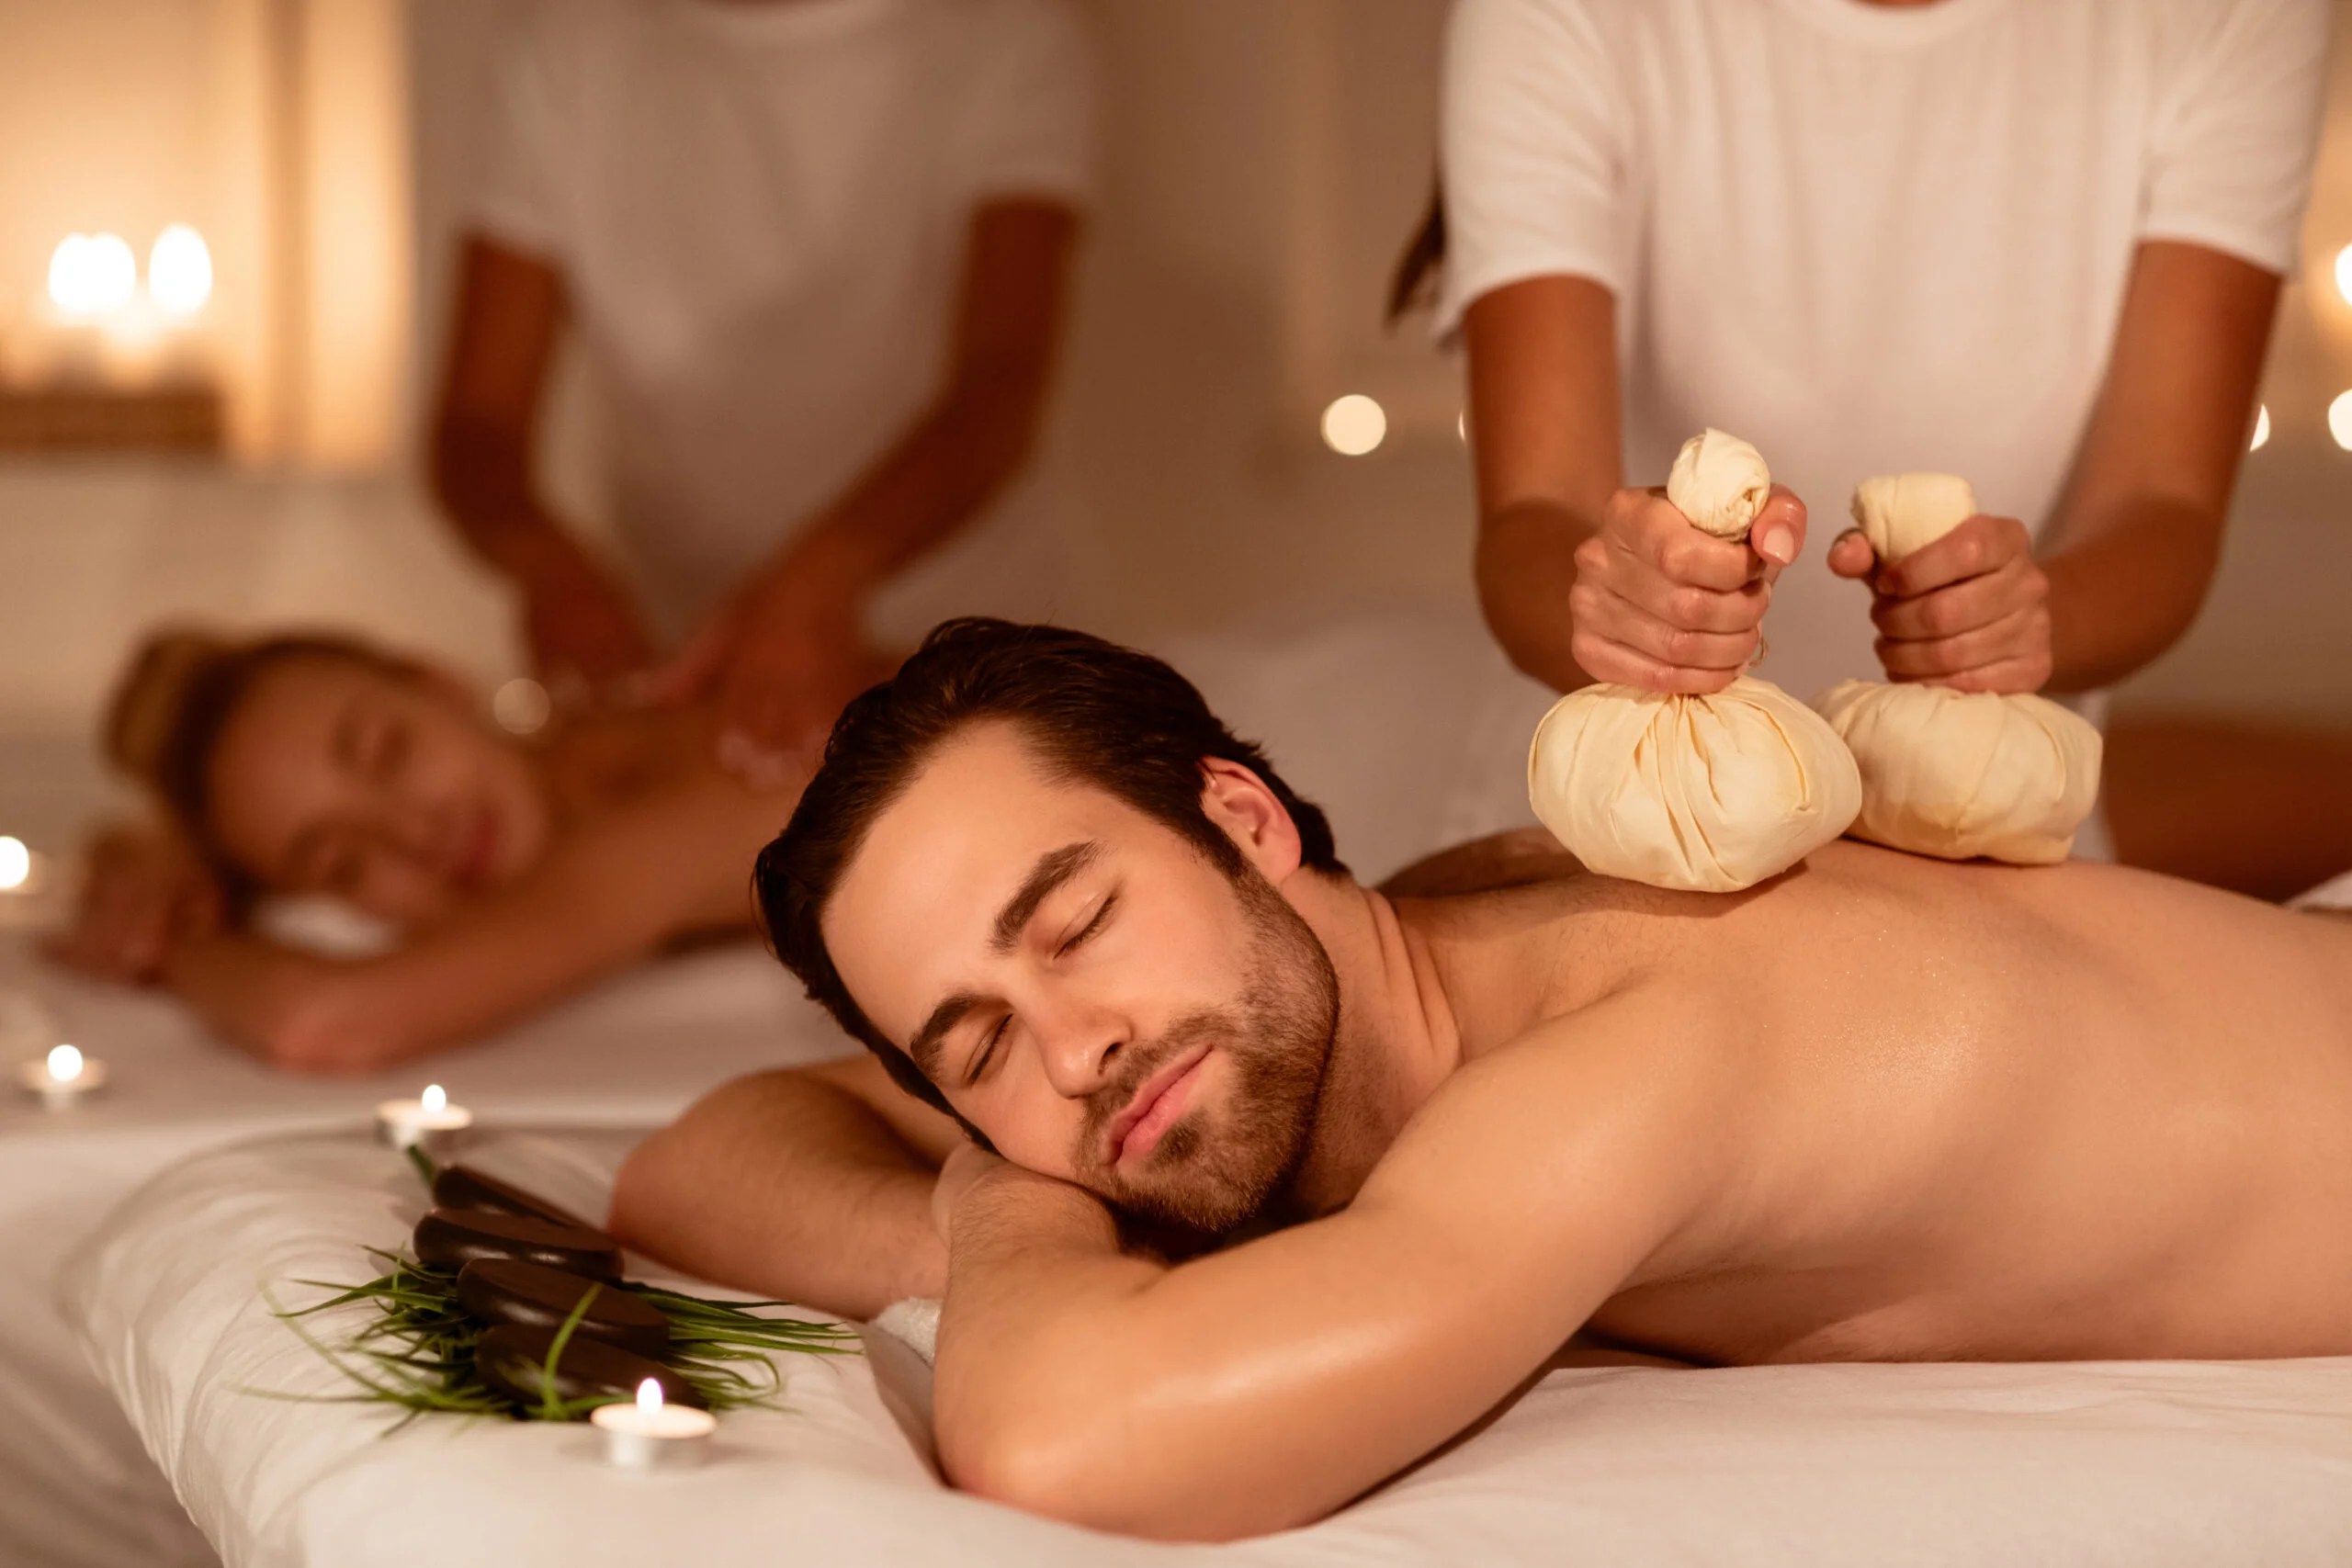 What Are The Most Frequently Asked Questions About Massage?